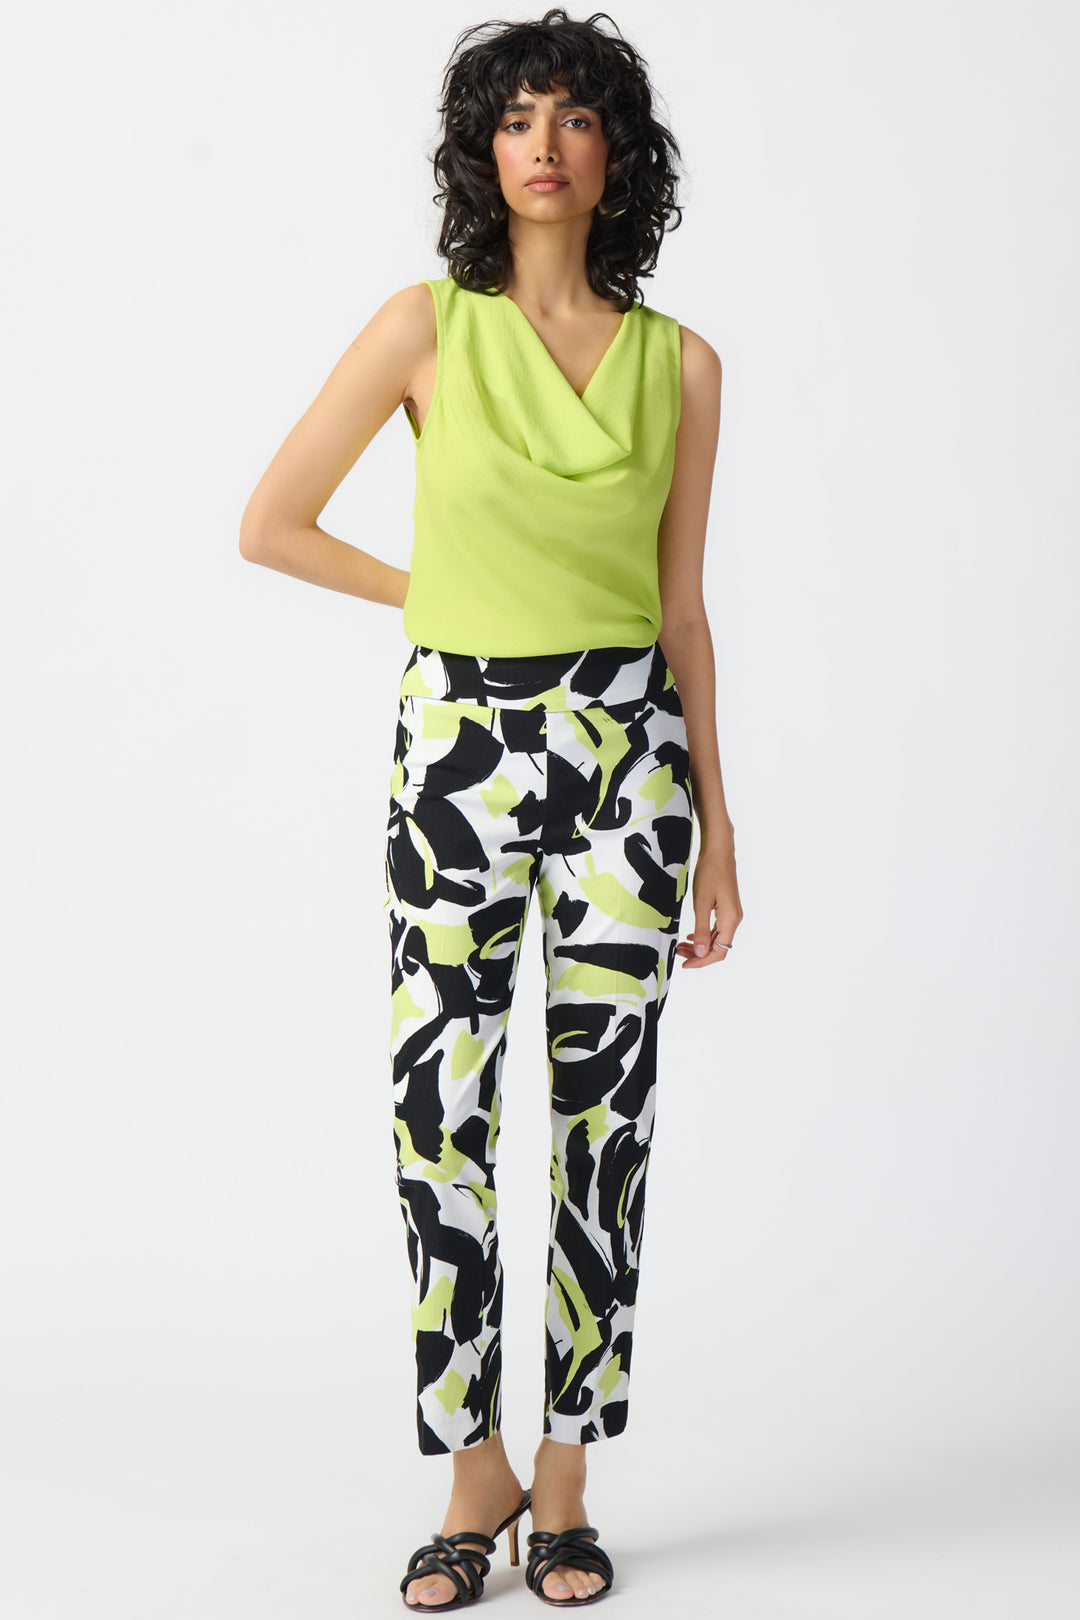 With an elastic waist and slip-on design, these pants offer a modern and elegant look while providing an easy, breezy fit and feel. 